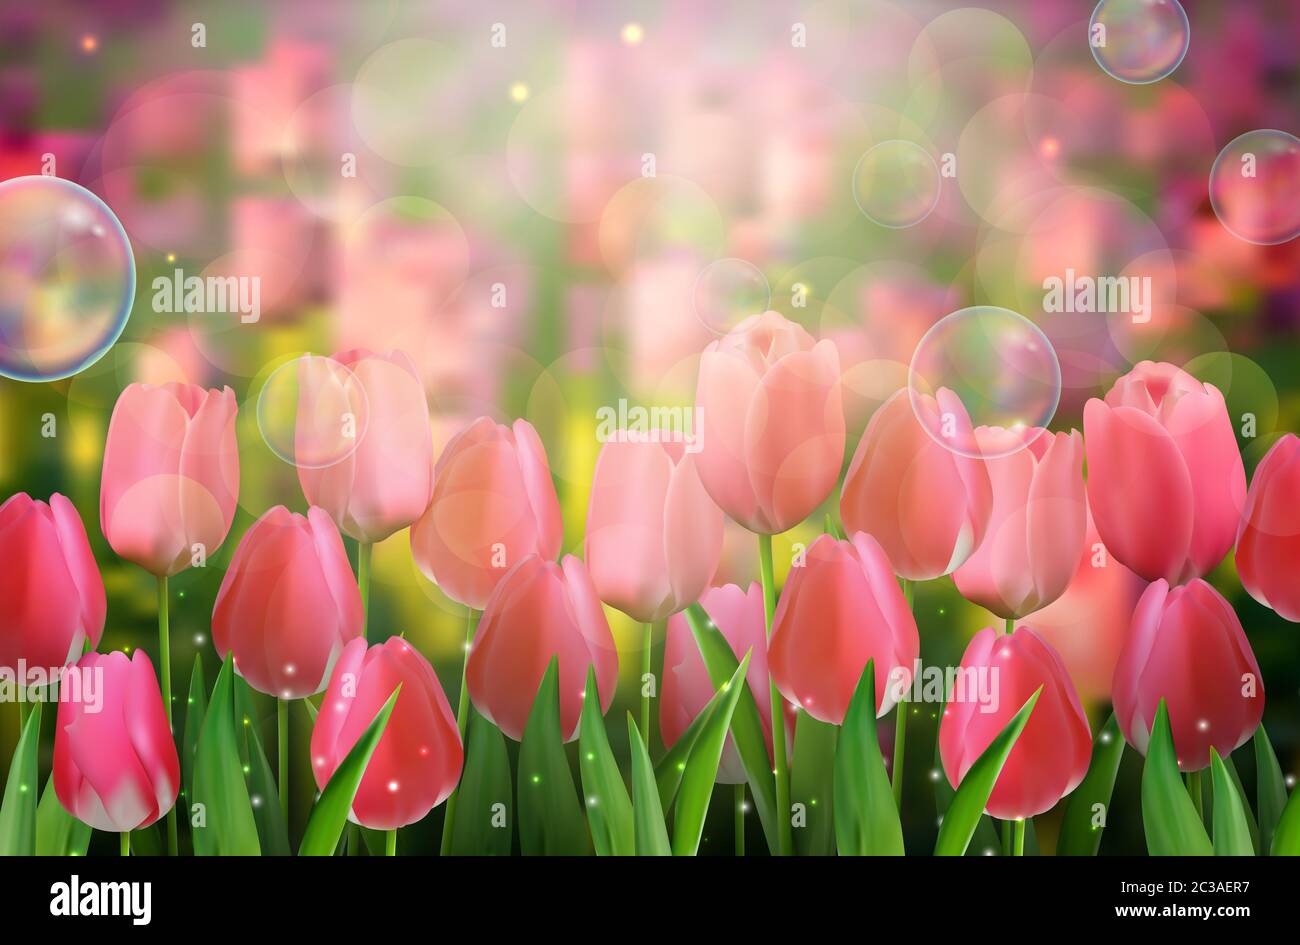 Red tulips flowers in the garden. Stock Photo